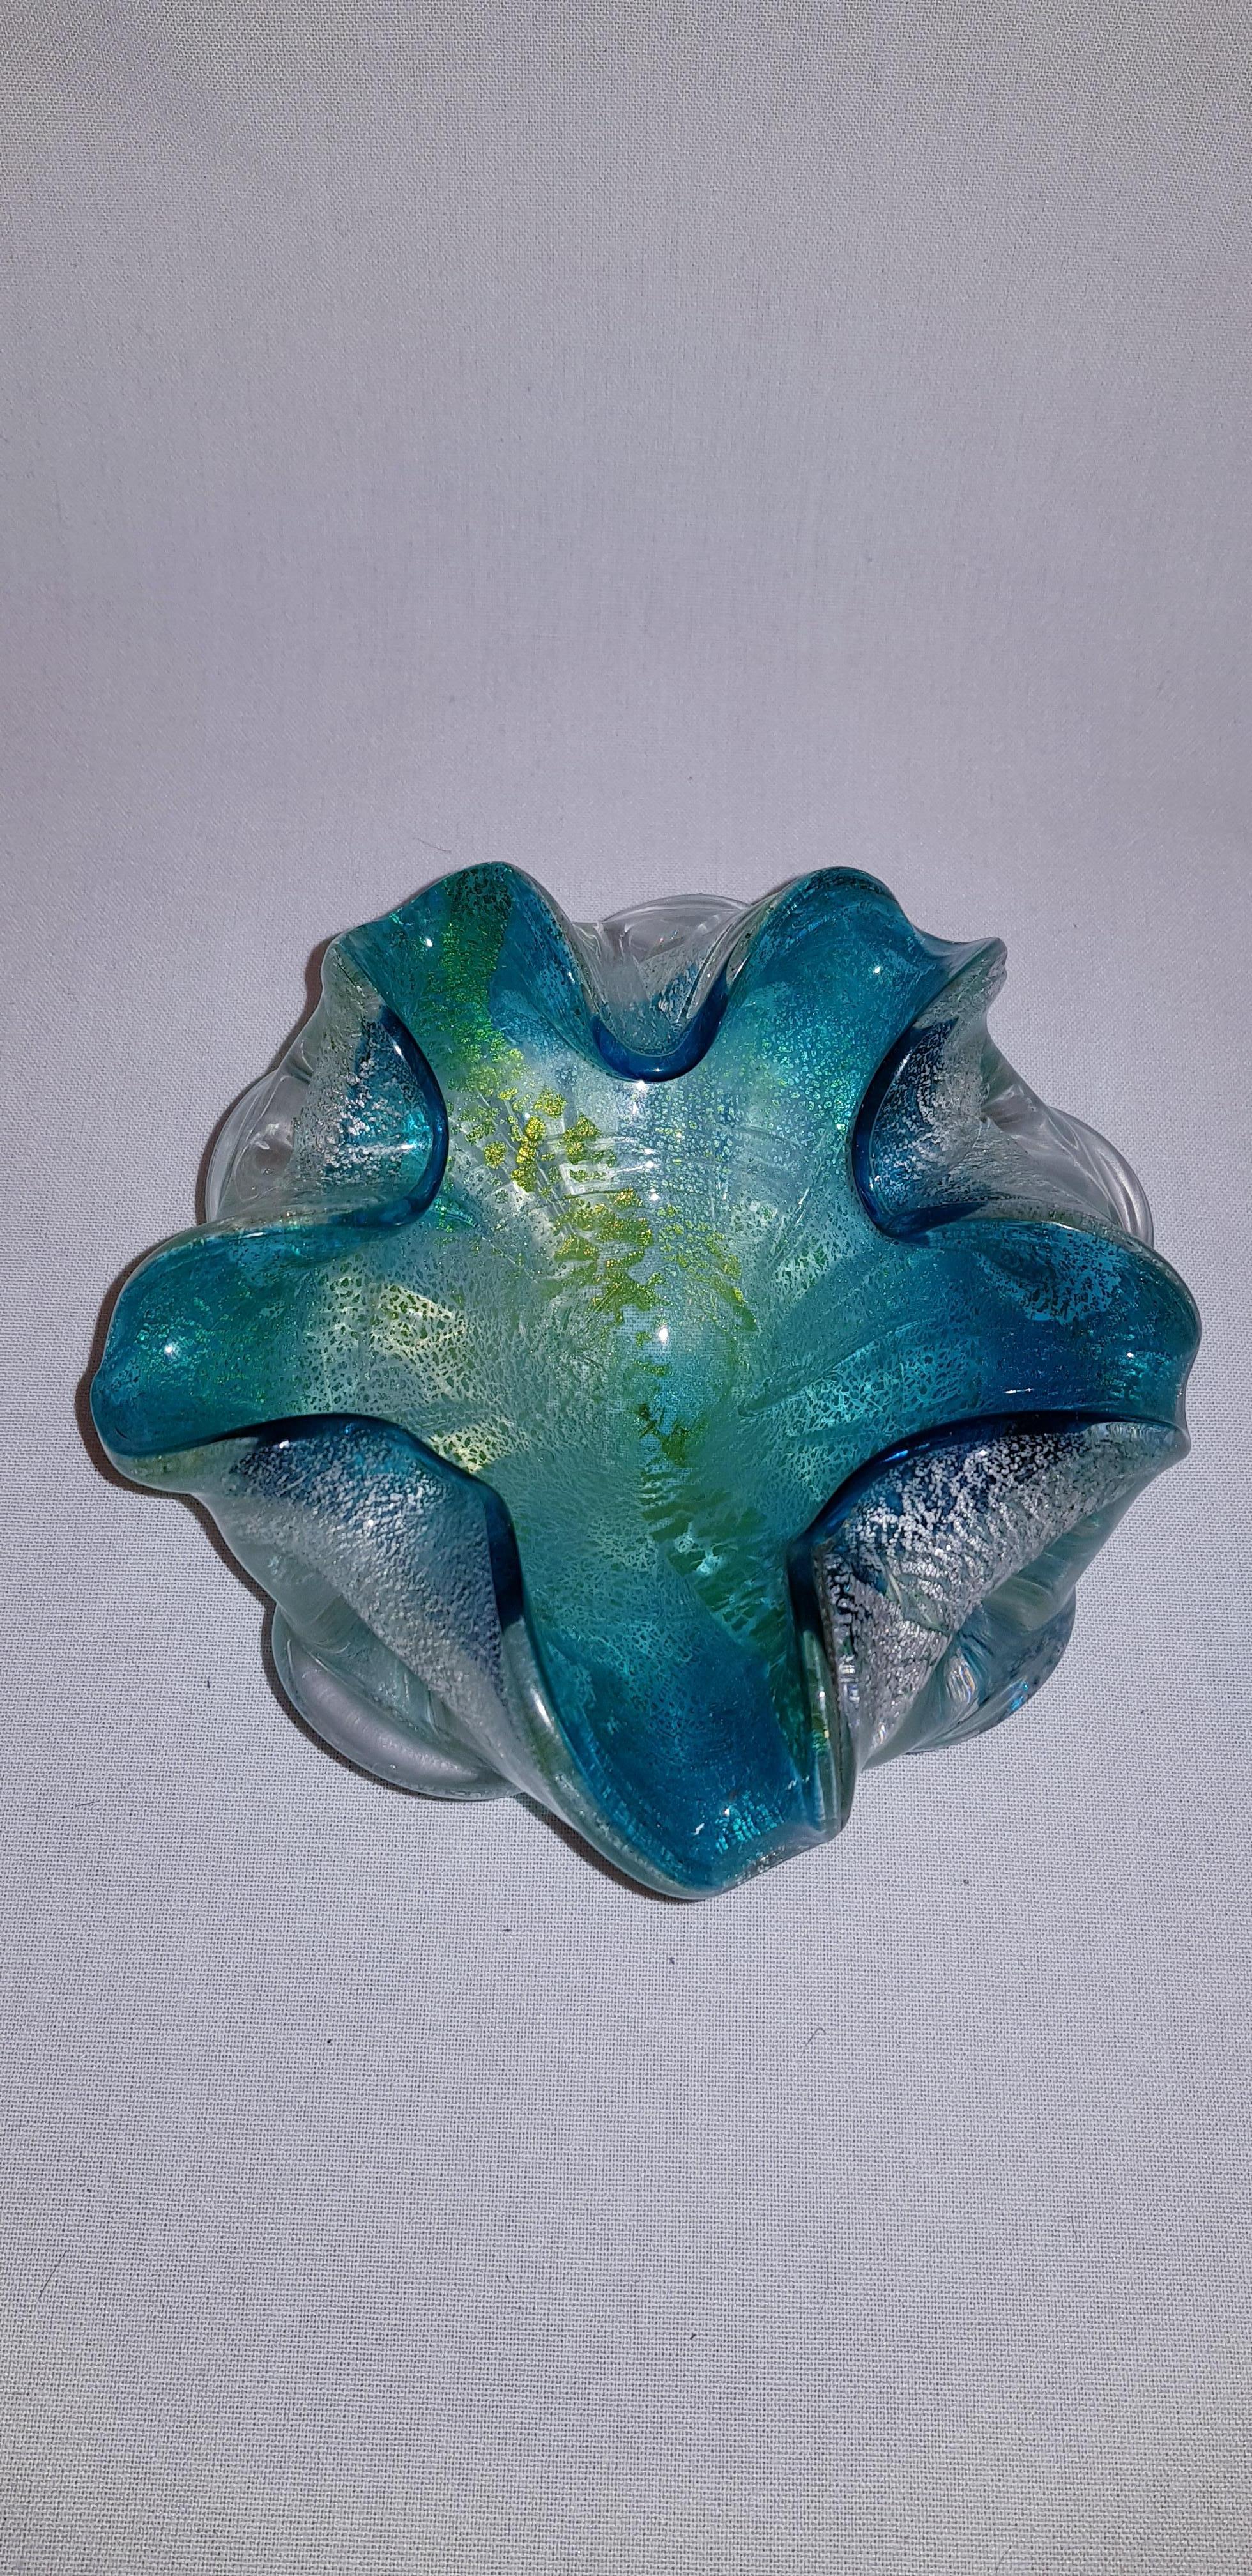 Beautiful middle of century murano glass decorative dish, blue and clear with gold and silver leaf brilliant condition.